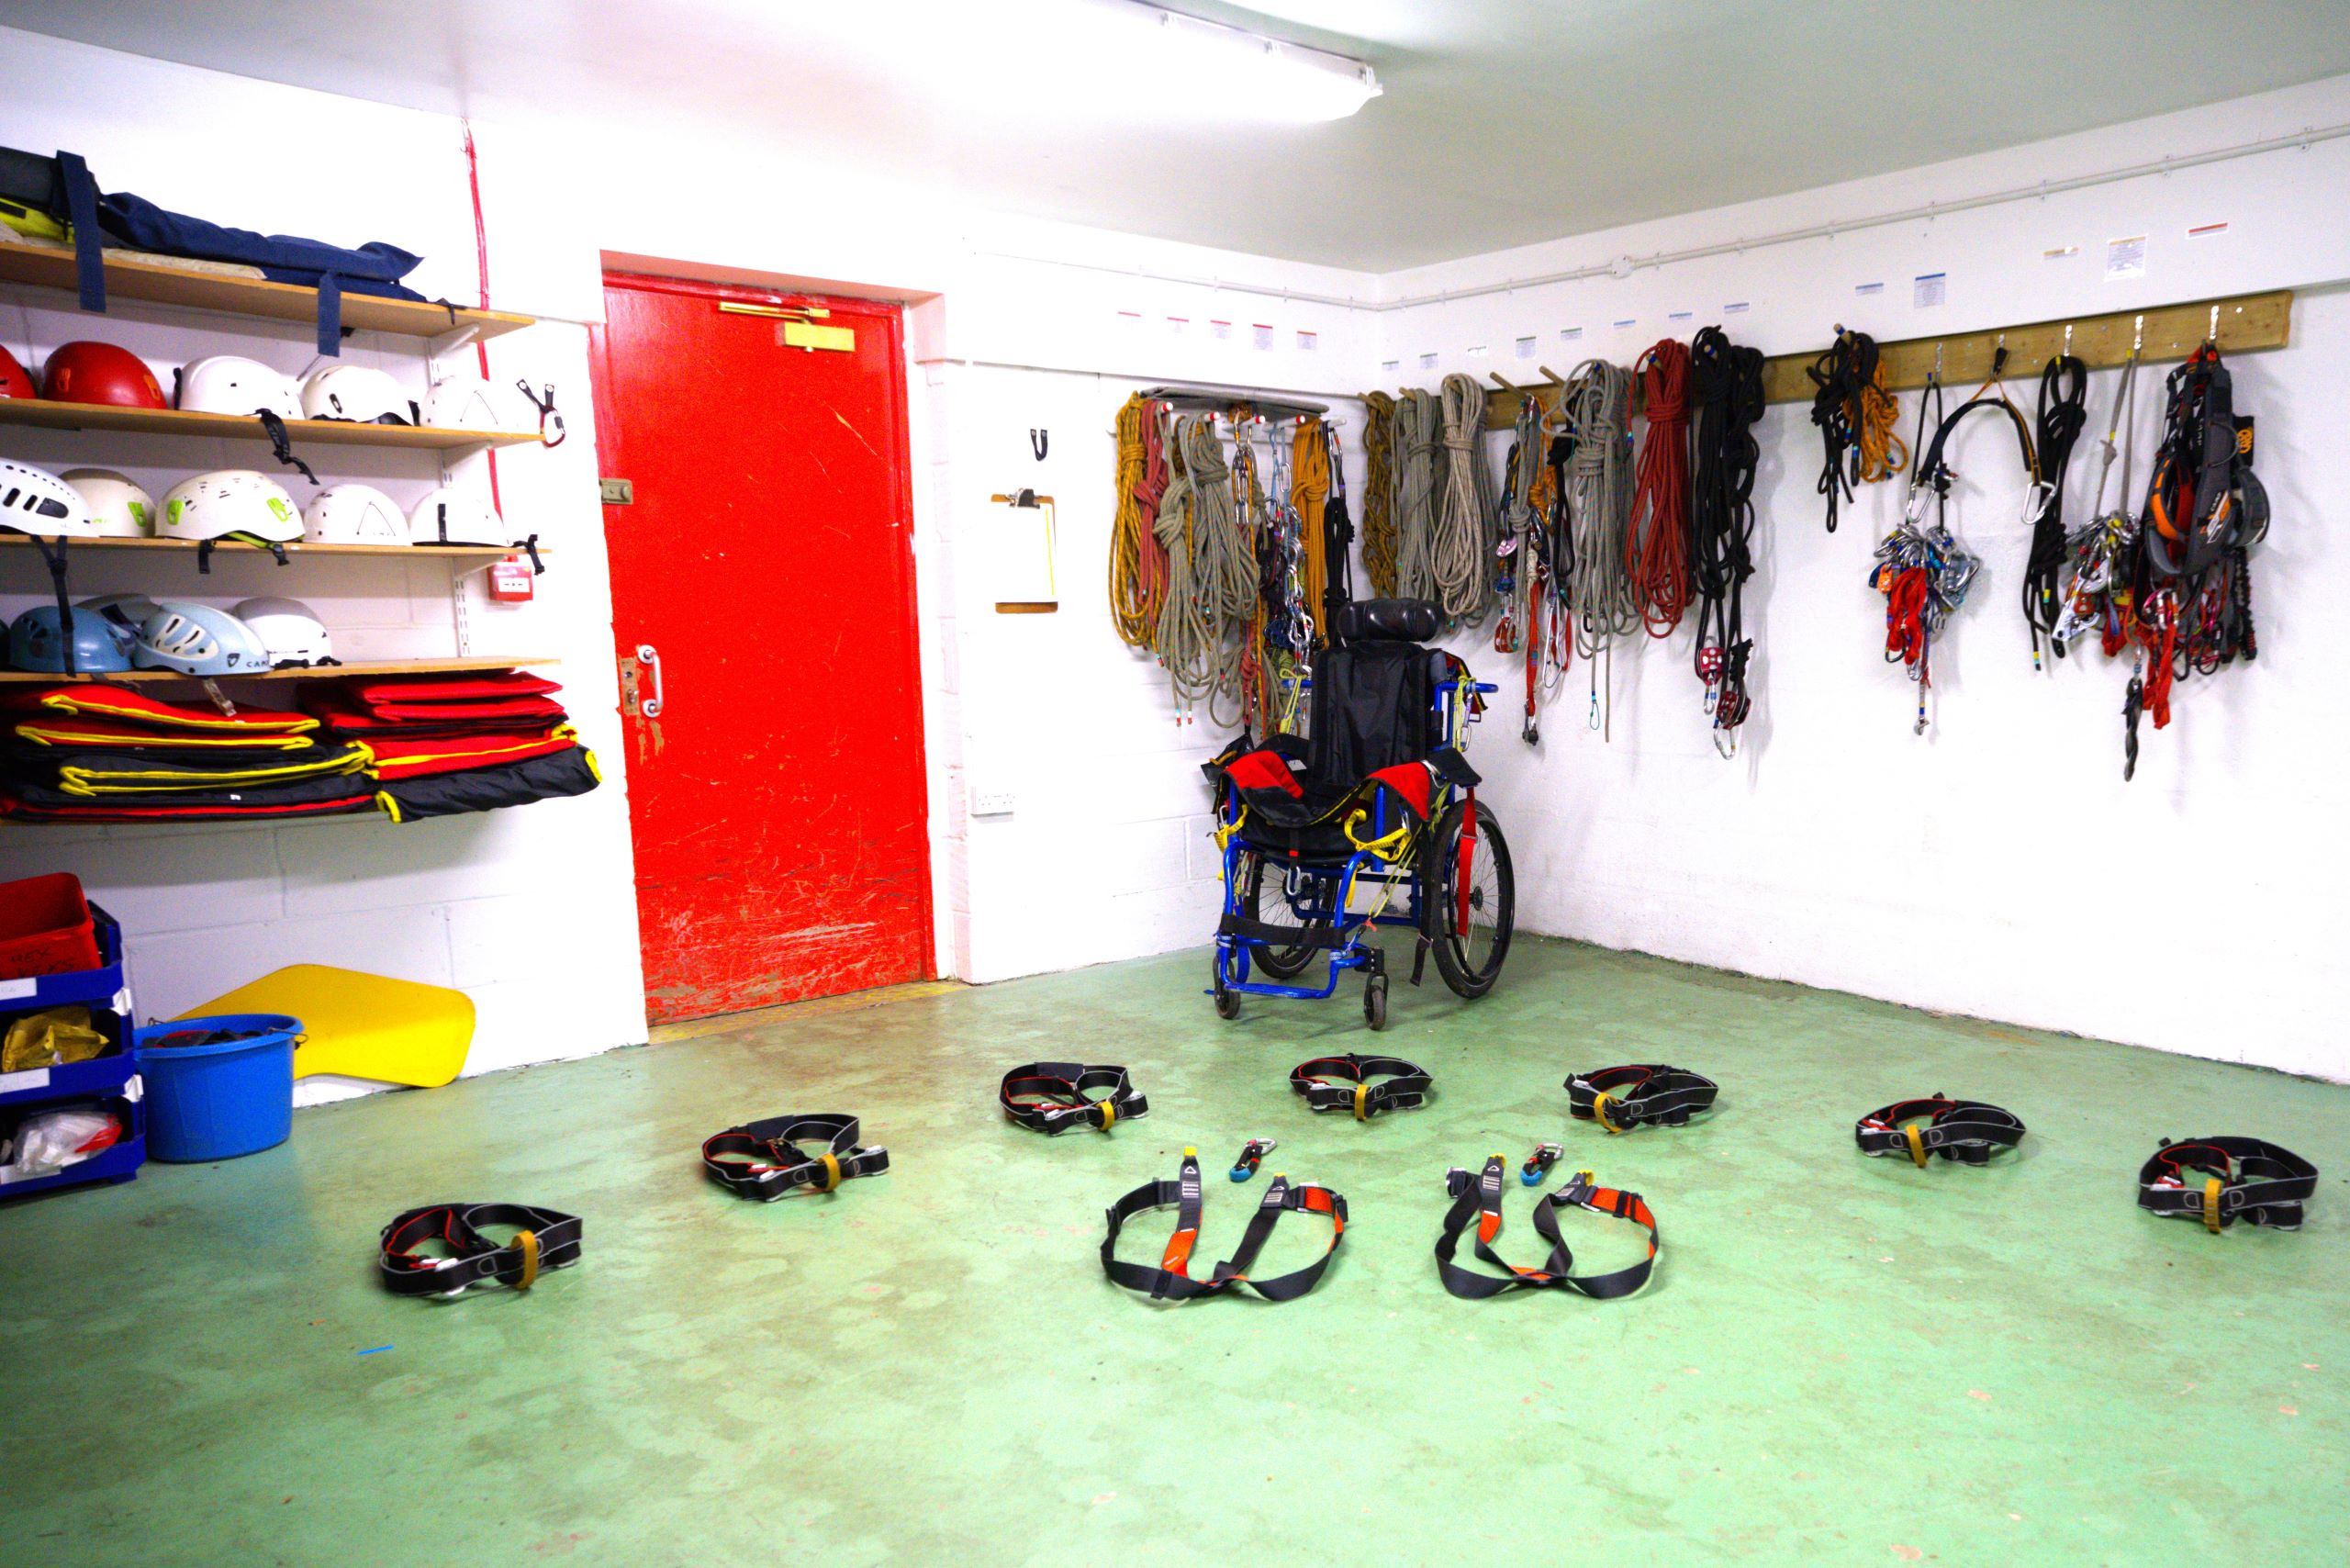 A room with a red door and green floor. There are helmets on shelves and ropes hanging on hooks on the wall, a wheelchair in the centre at the back and in the foreground, there is a selection of harnesses on the floor laid out ready for guests to put them on.